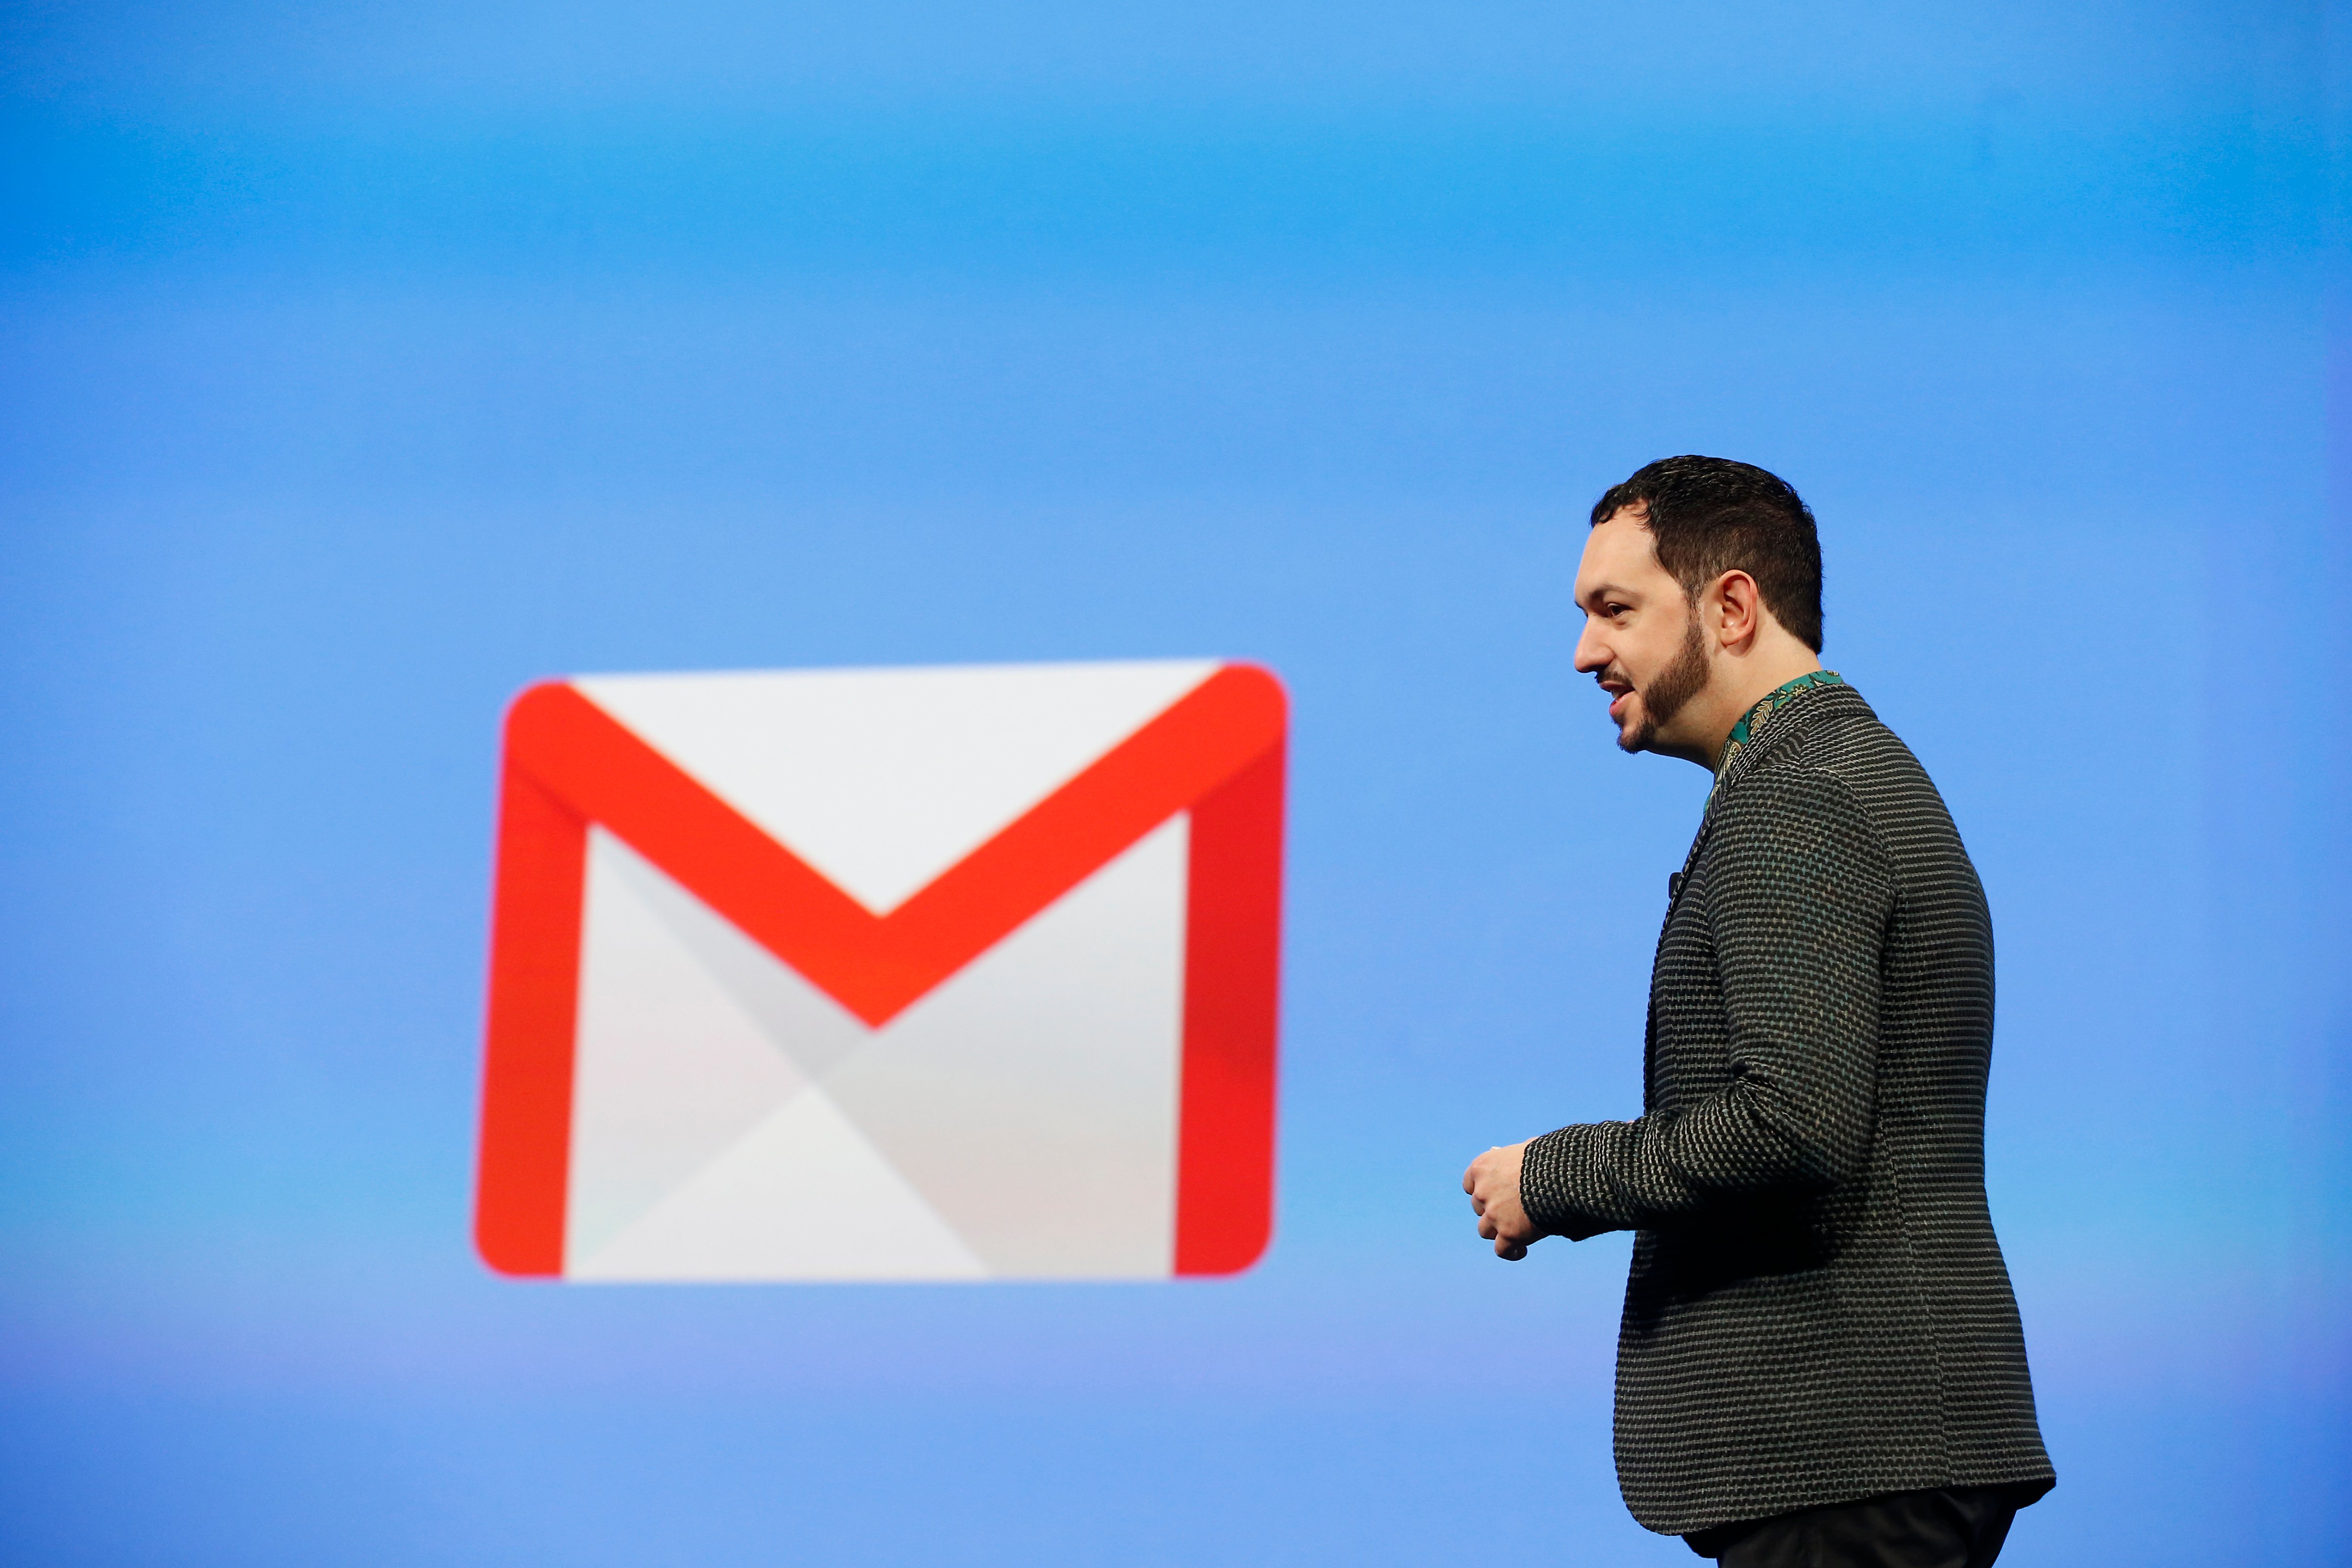 Matias Durante, Vice President, Design at Google, speaks on stage during the Google I/O Developers Conference at Moscone Center on June 25, 2014 in San Francisco, California. (Stephen Lam&mdash;Getty Images)